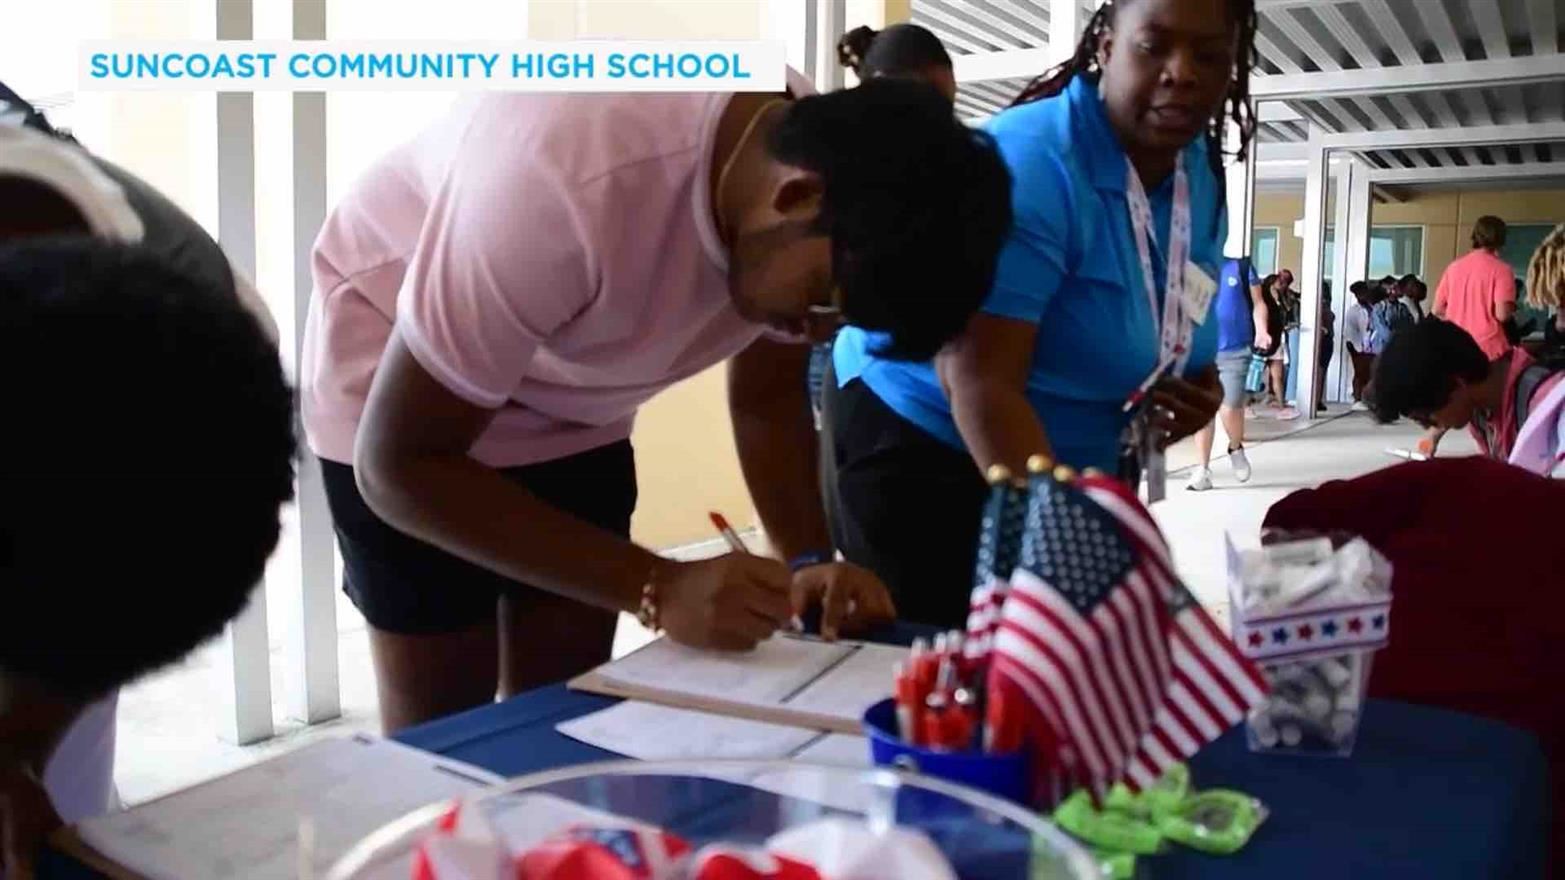  Students signing up to vote